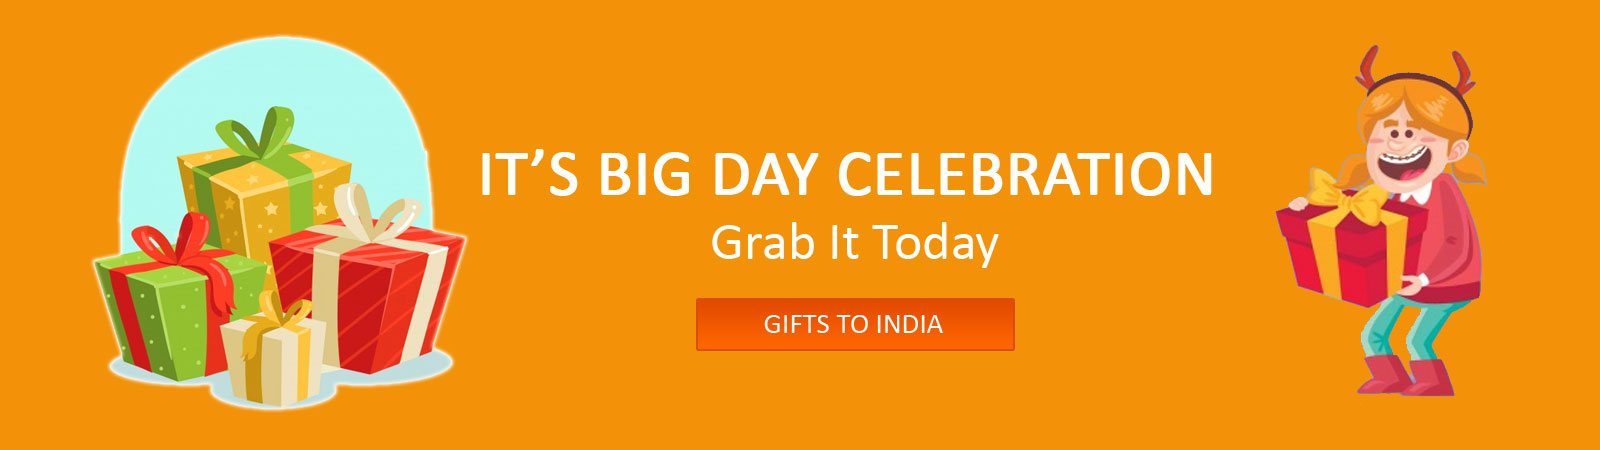 Send gifts to India, online gifts delivery in India by best gifts shop